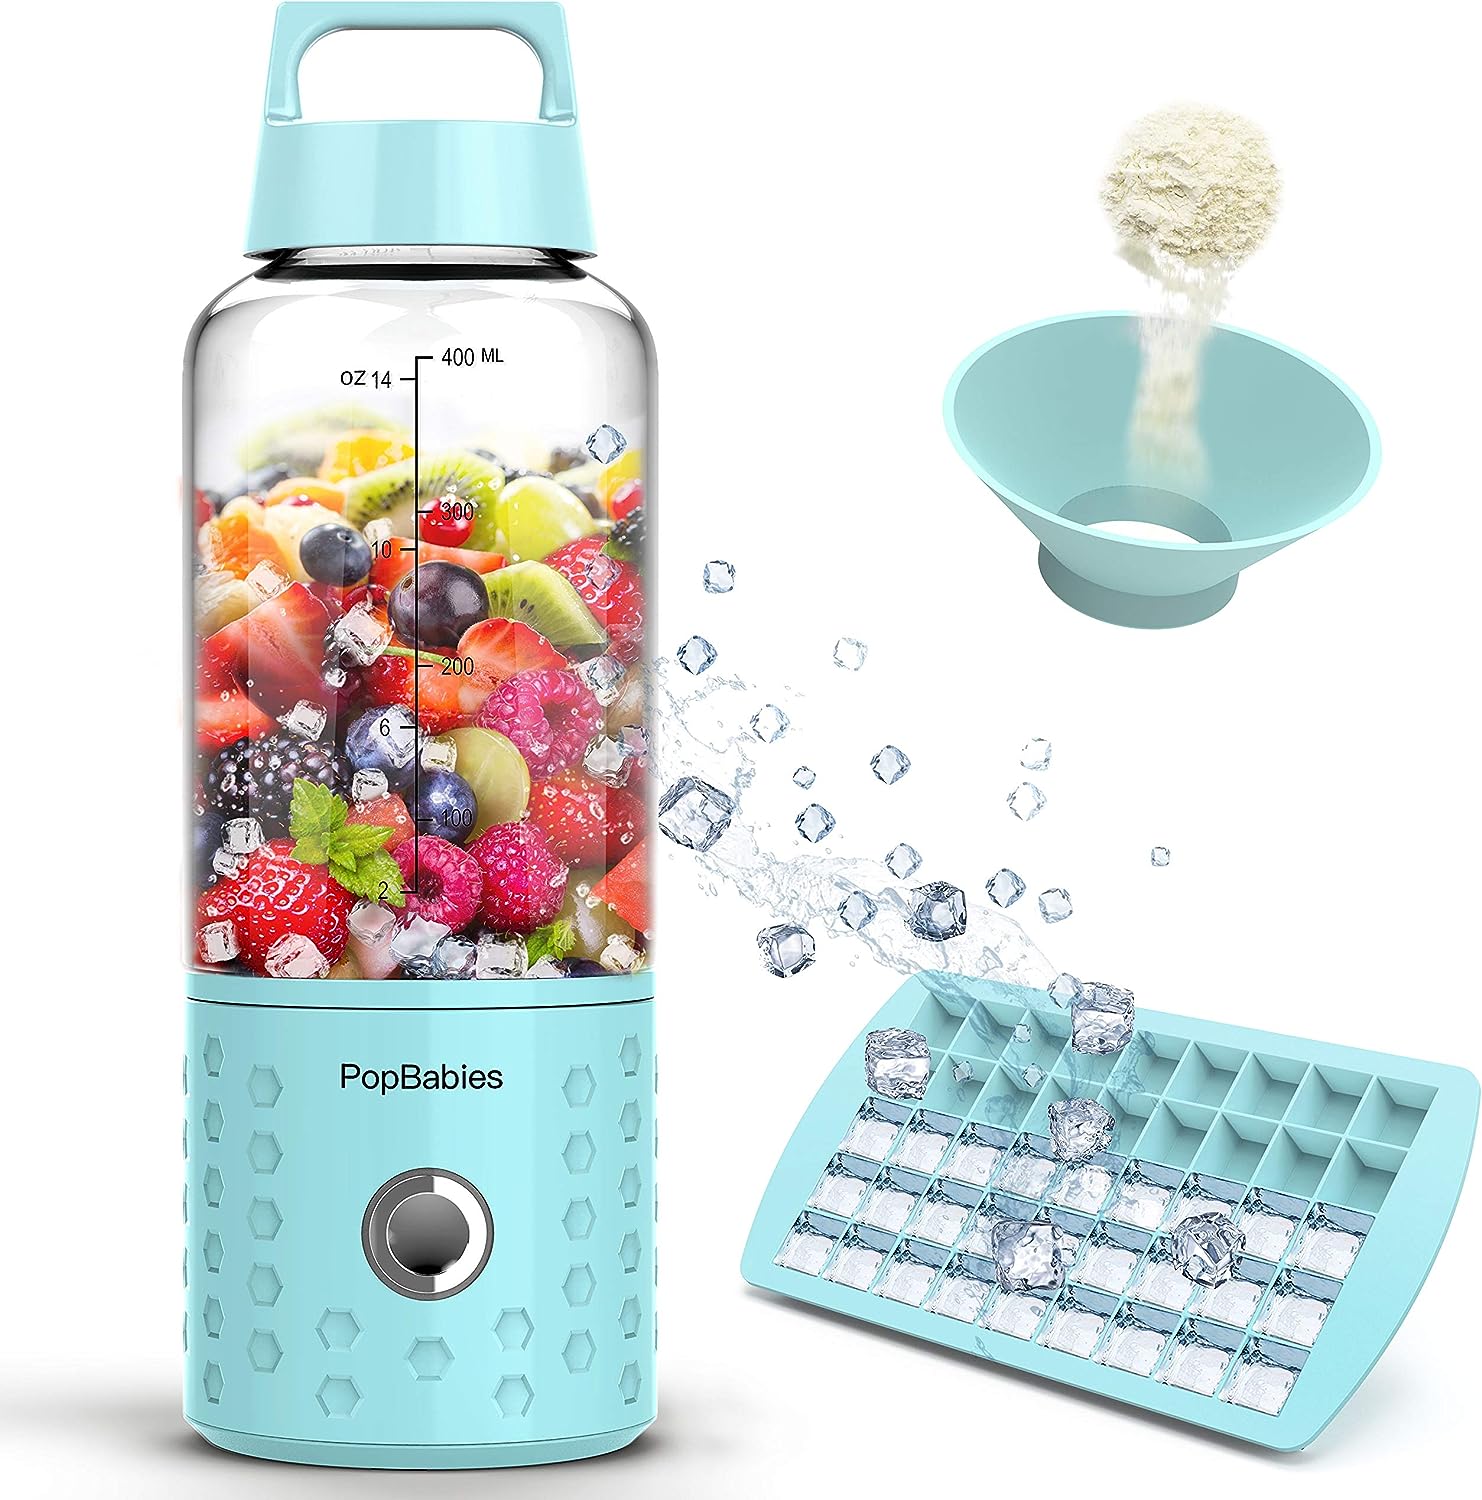 PopBabies Portable Personal Blender Review